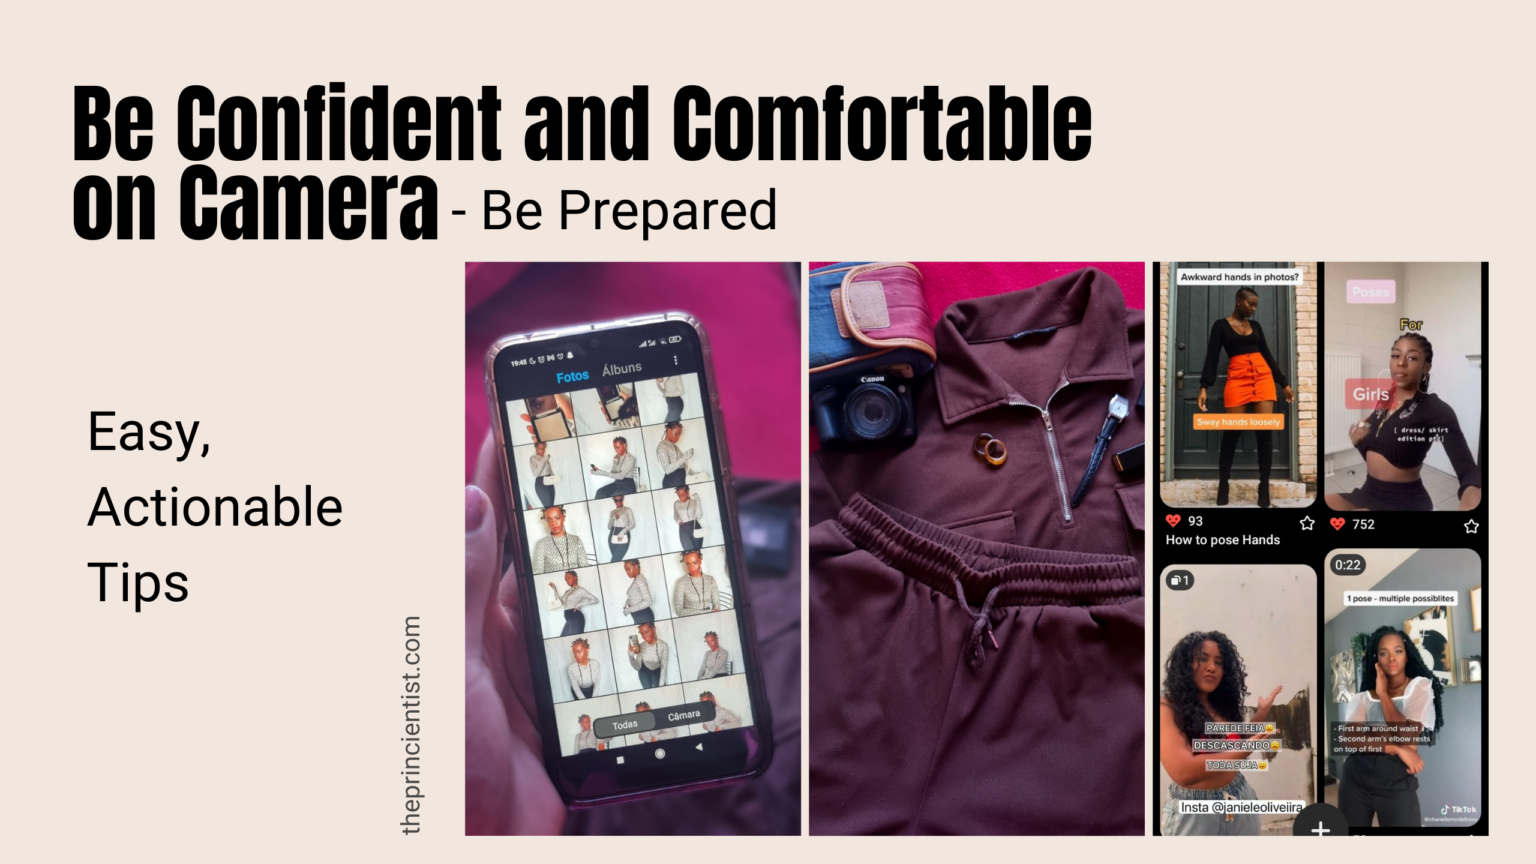 be confident on camera be prepared - you need to prepare beforehand the clothes, inspo, poses